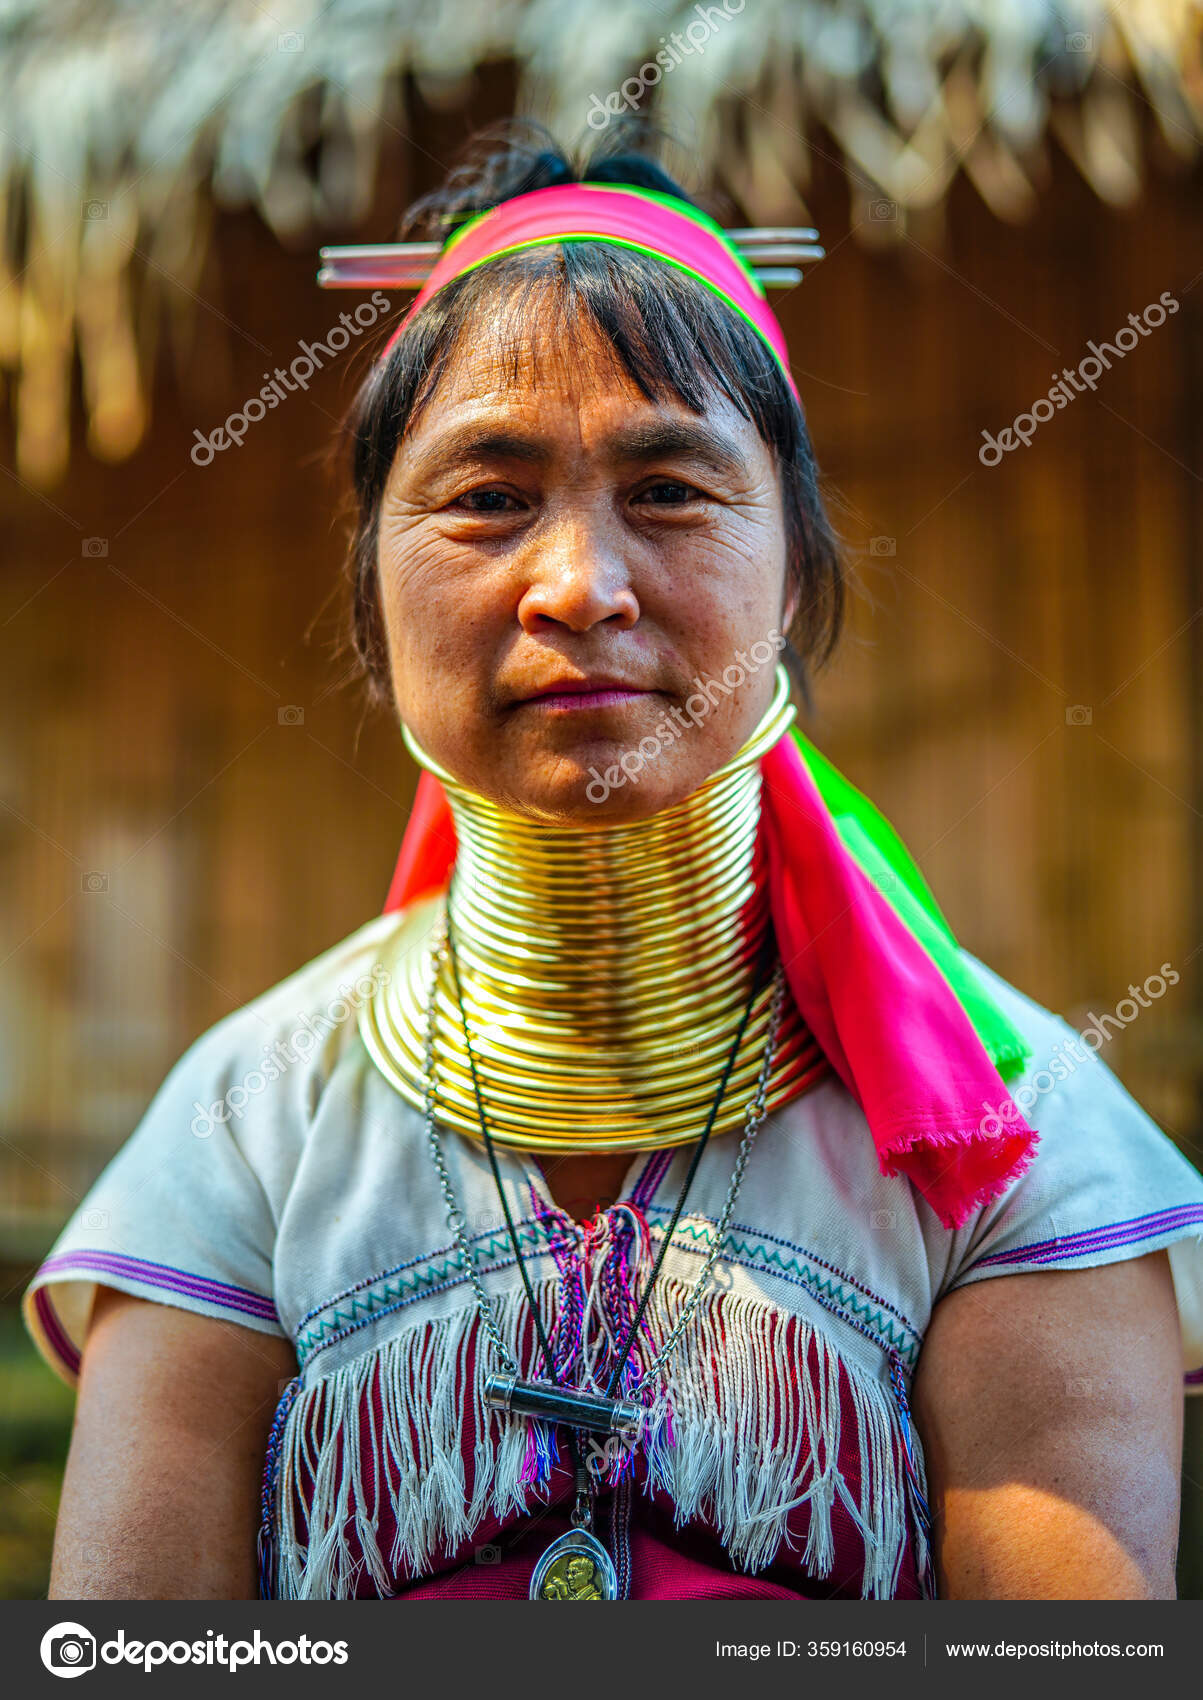 Doogle World - KAYAN LONG NECK HILL TRIBE, NORTHERN THAILAND. -The Kayan  women, also known as “giraffe women”, traditionally wear brass coils around  their neck in order to give the impression that